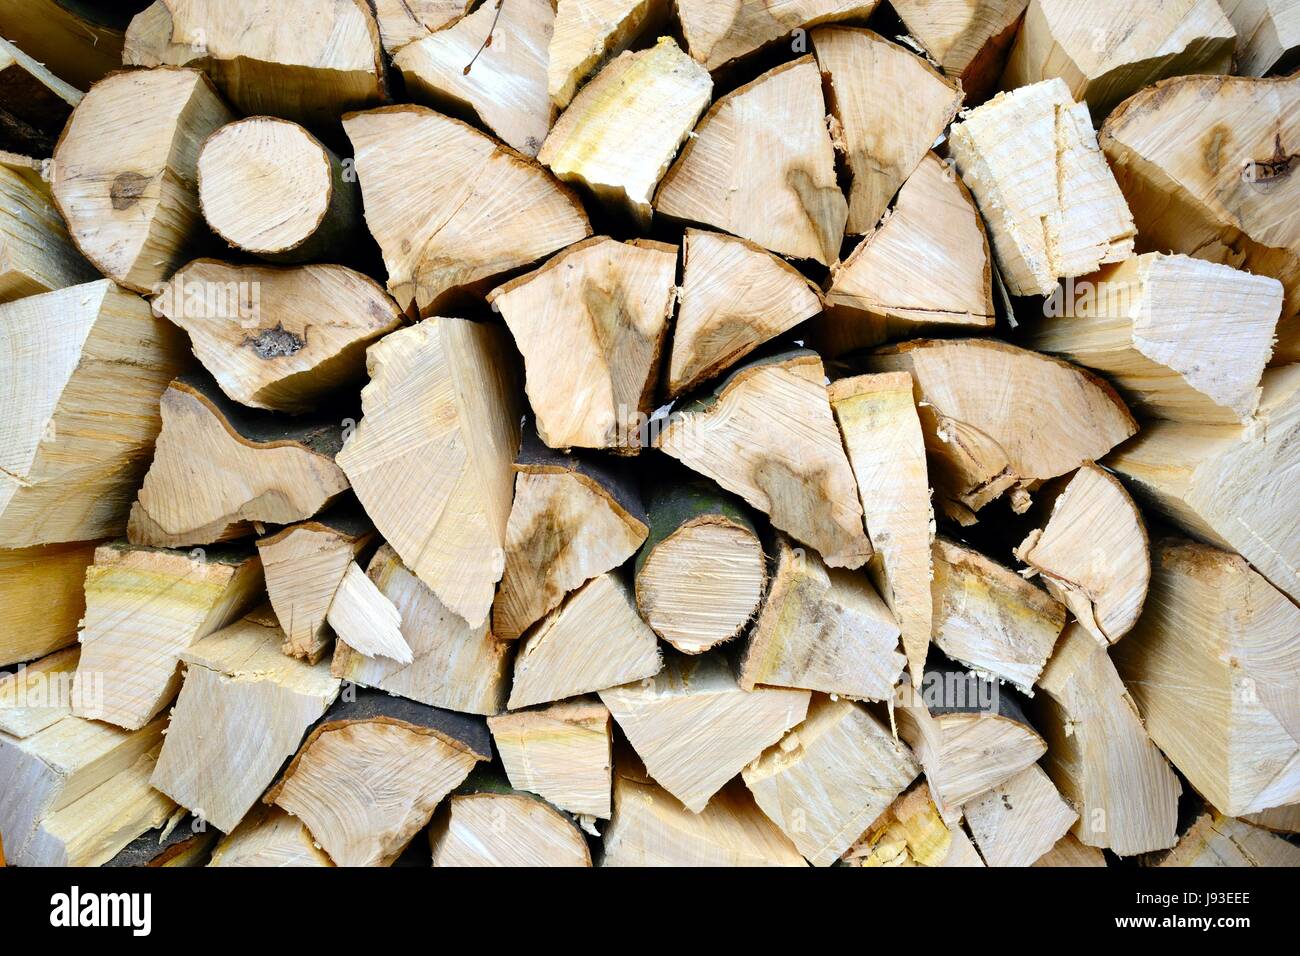 spare time, free time, leisure, leisure time, wood, hobby, firewood, minced, Stock Photo